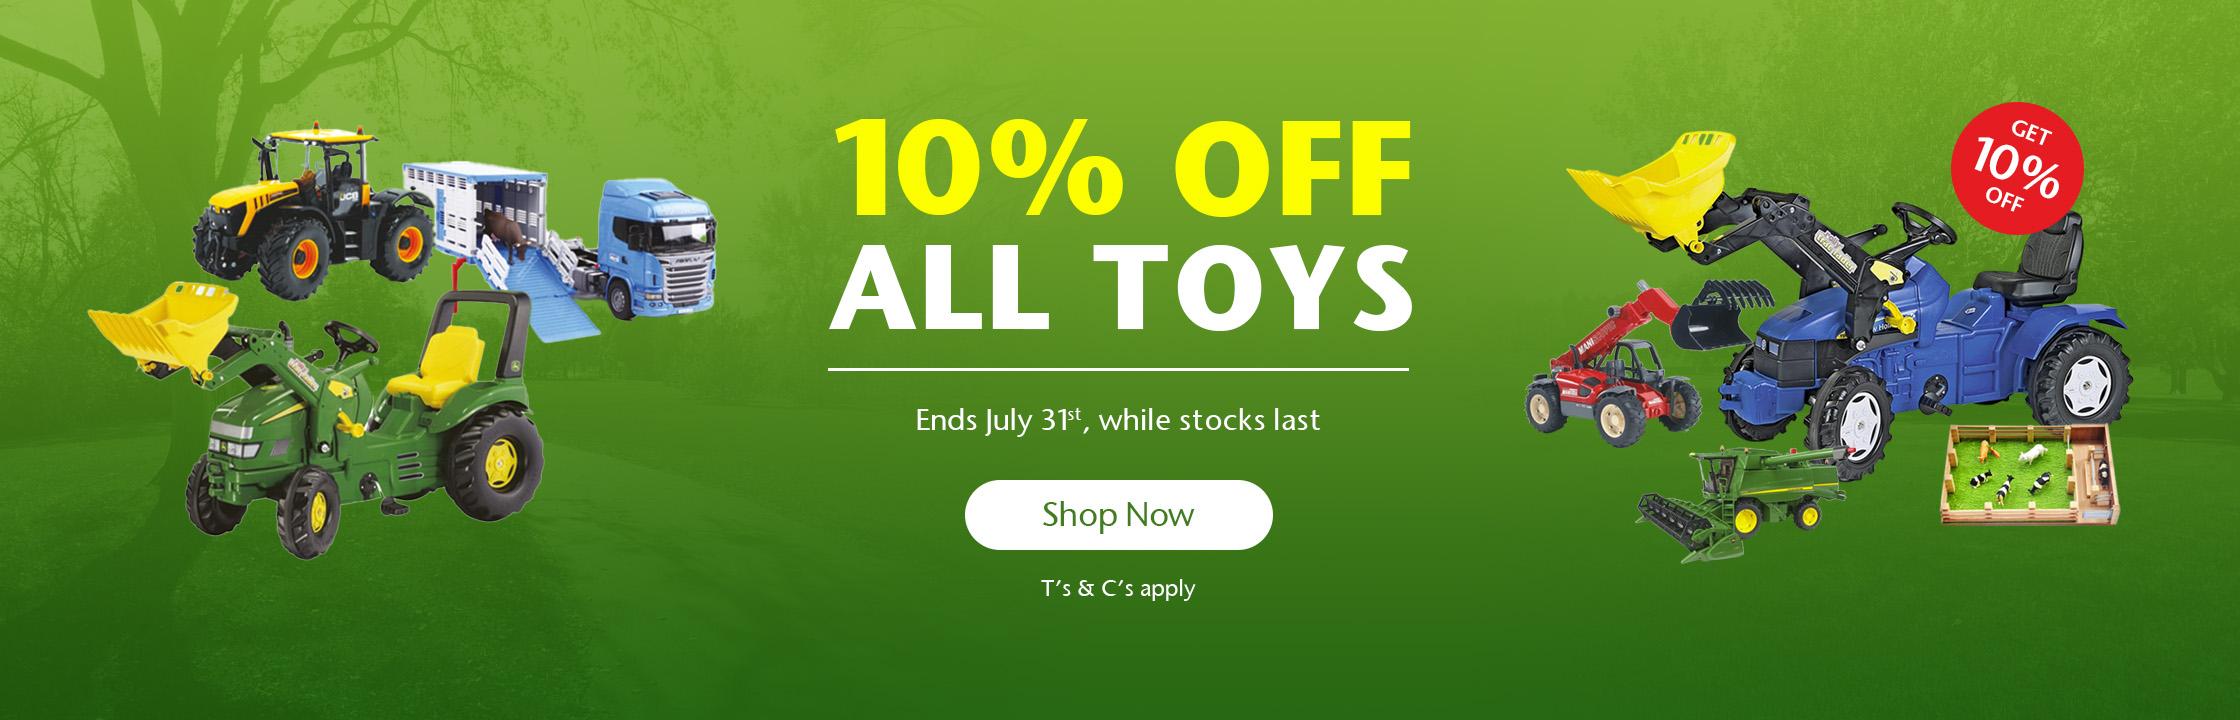 10% OFF Toys 